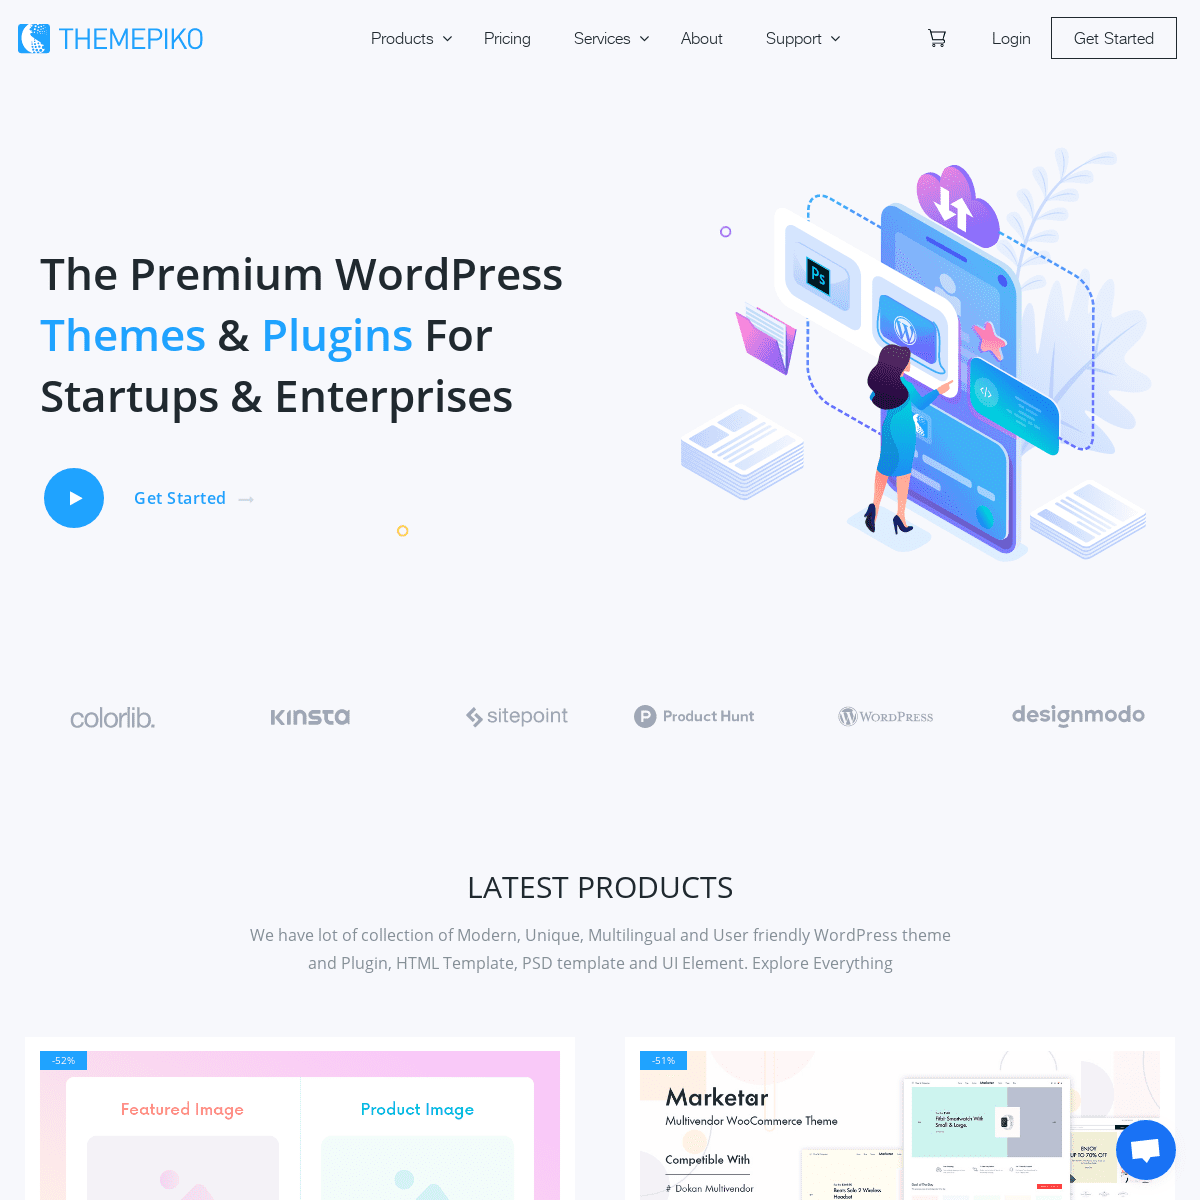 A complete backup of themepiko.com